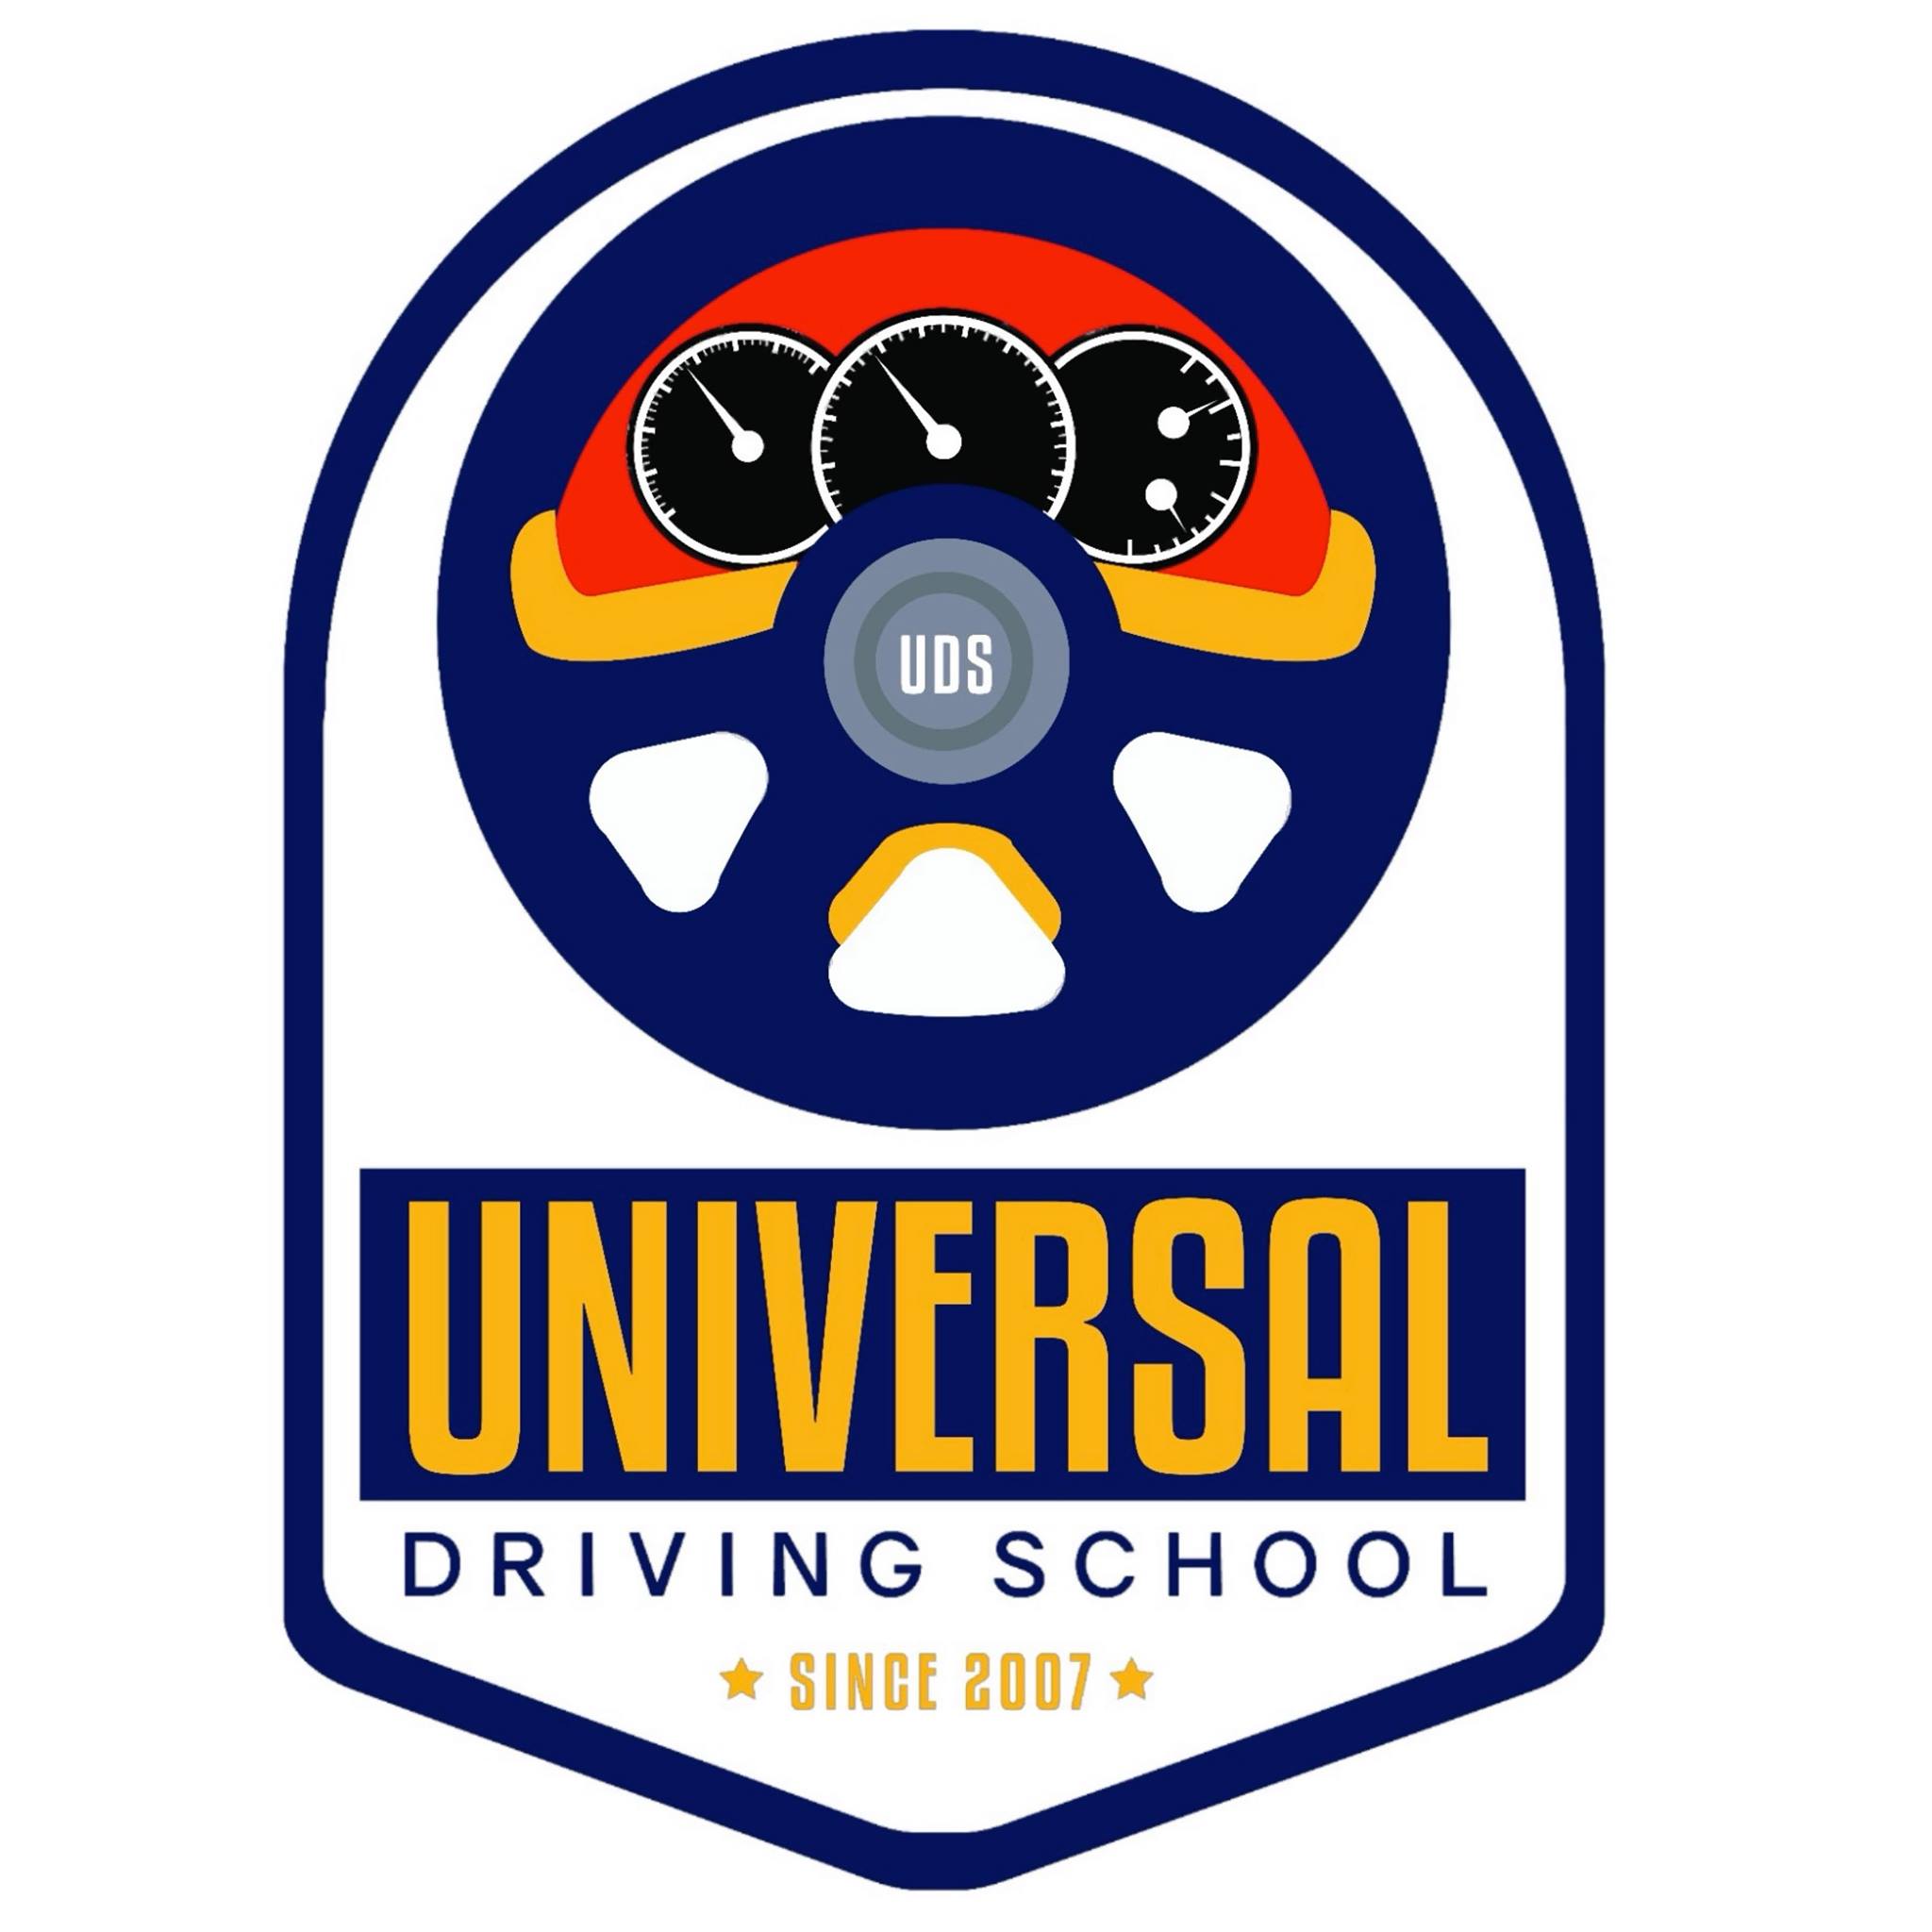 driving school in the philippines - universal